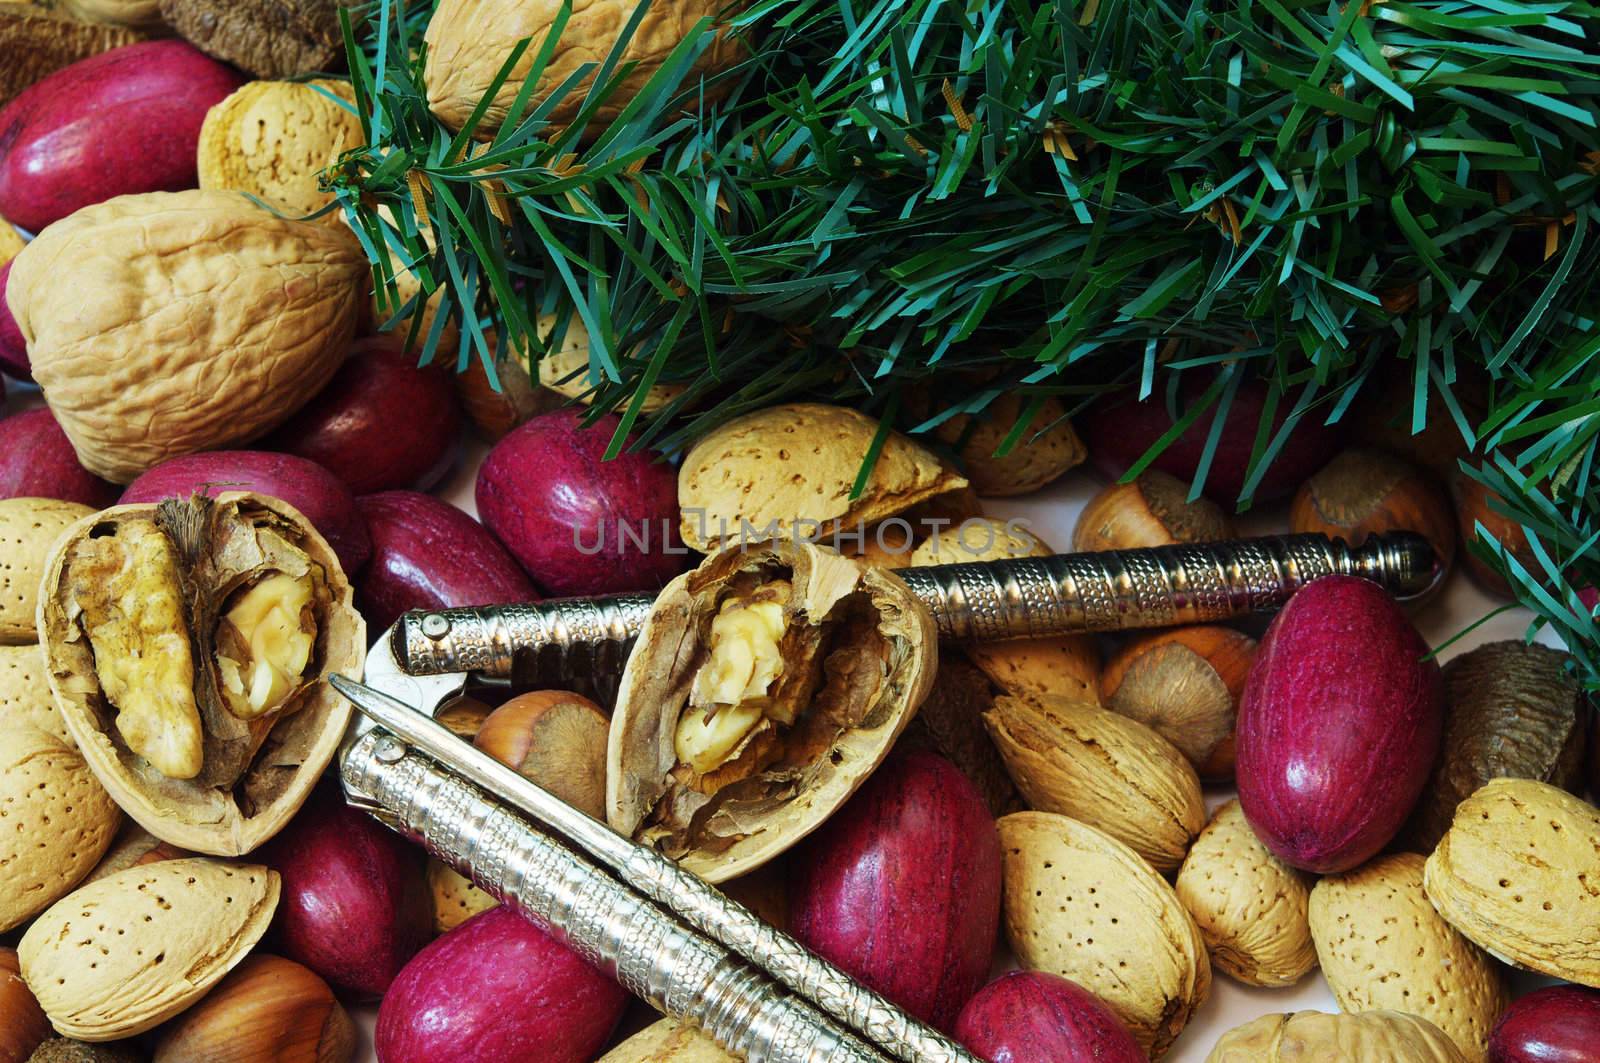 Christmas Mixed Nuts with Nut Crackers by edcorey